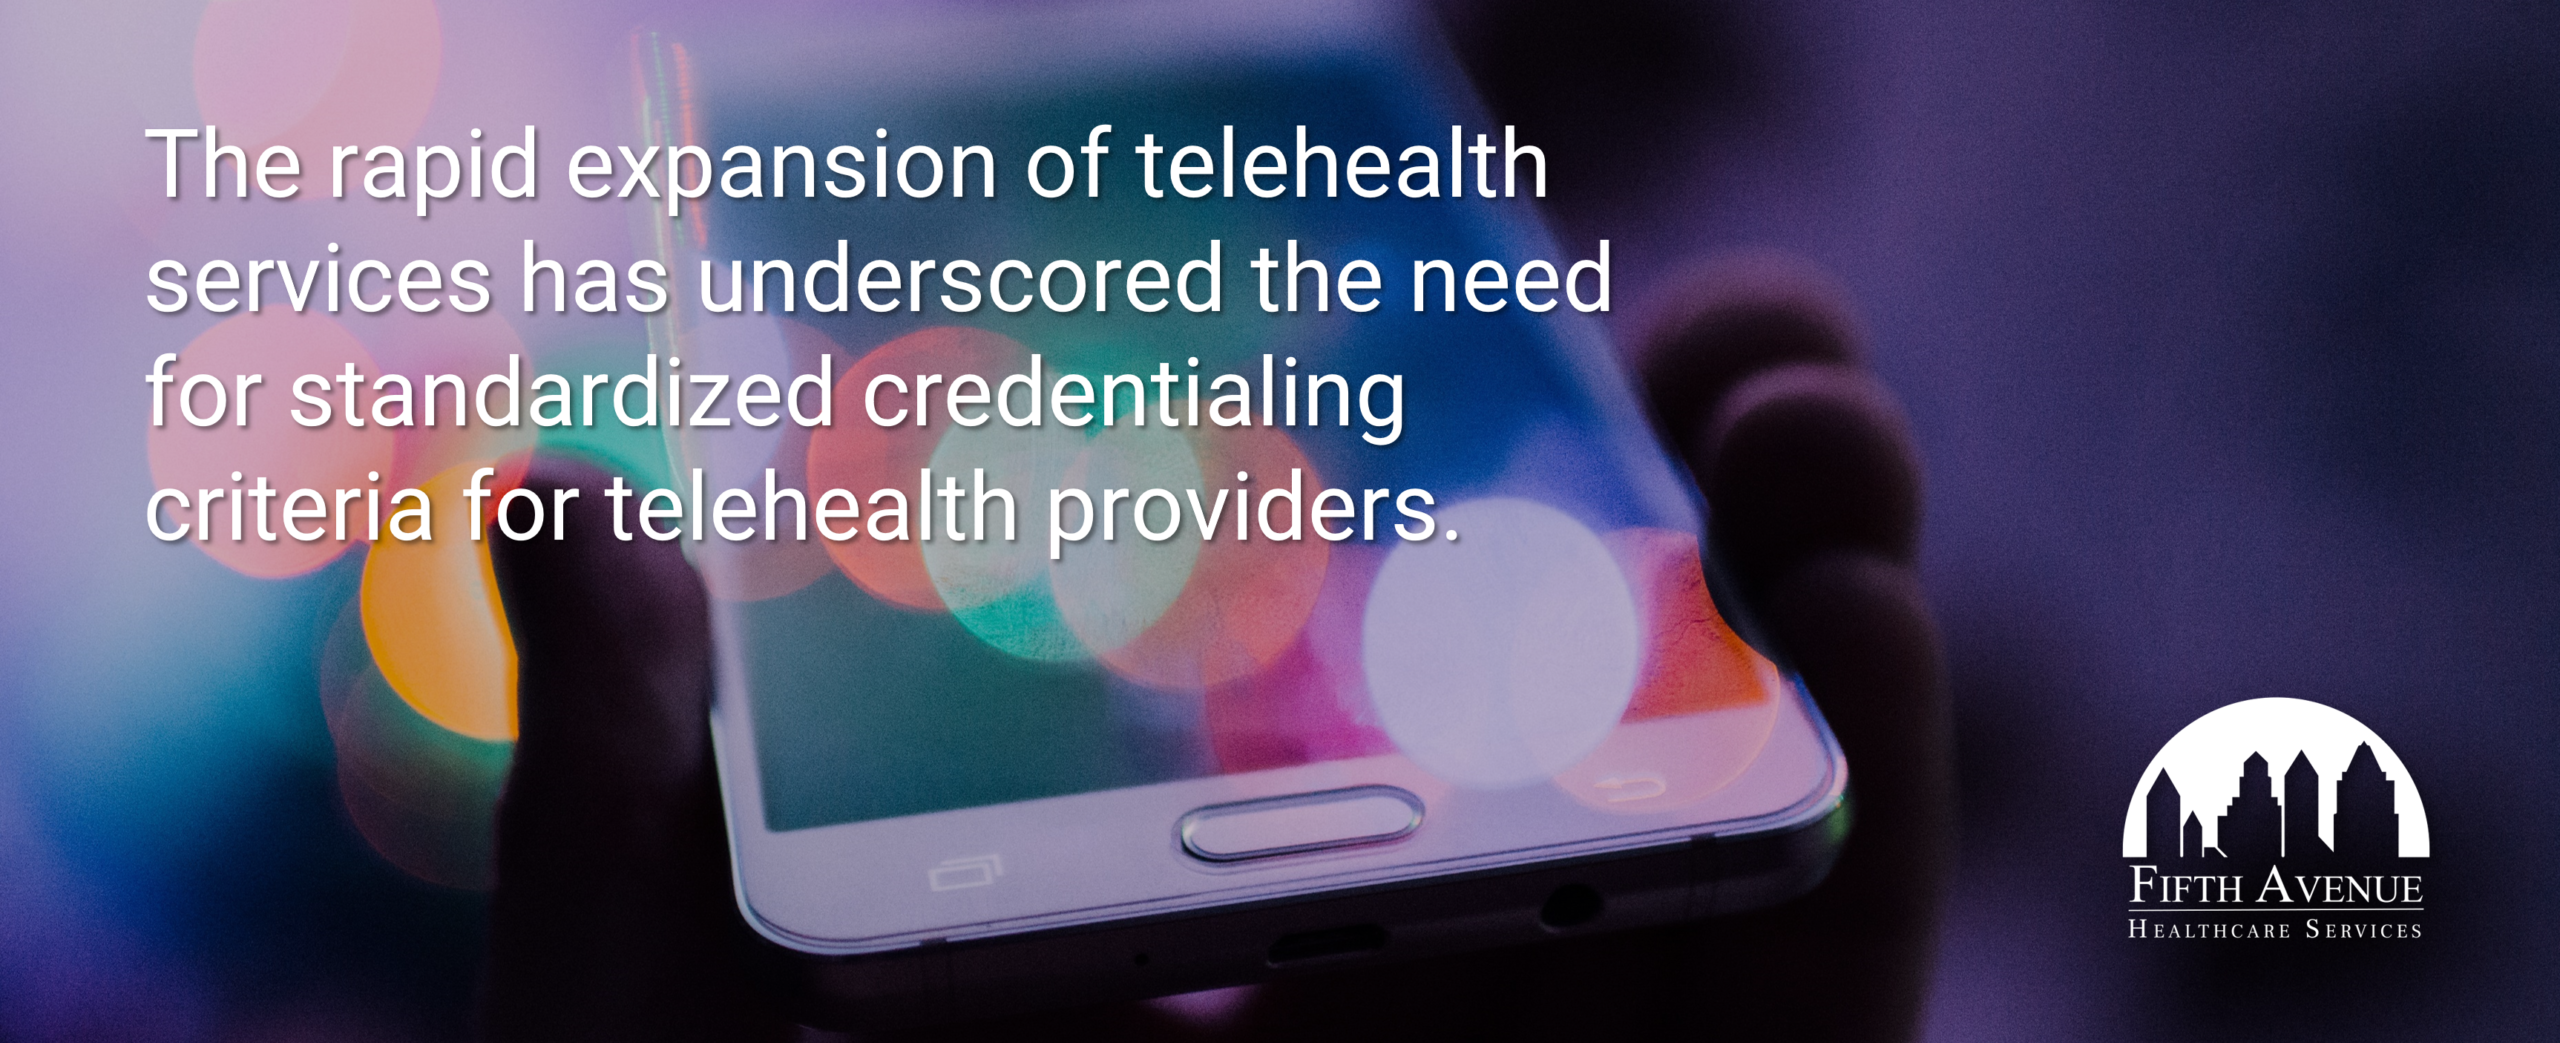 Telehealth Expansion Suggests Need For Standardized Credentialing Criteria